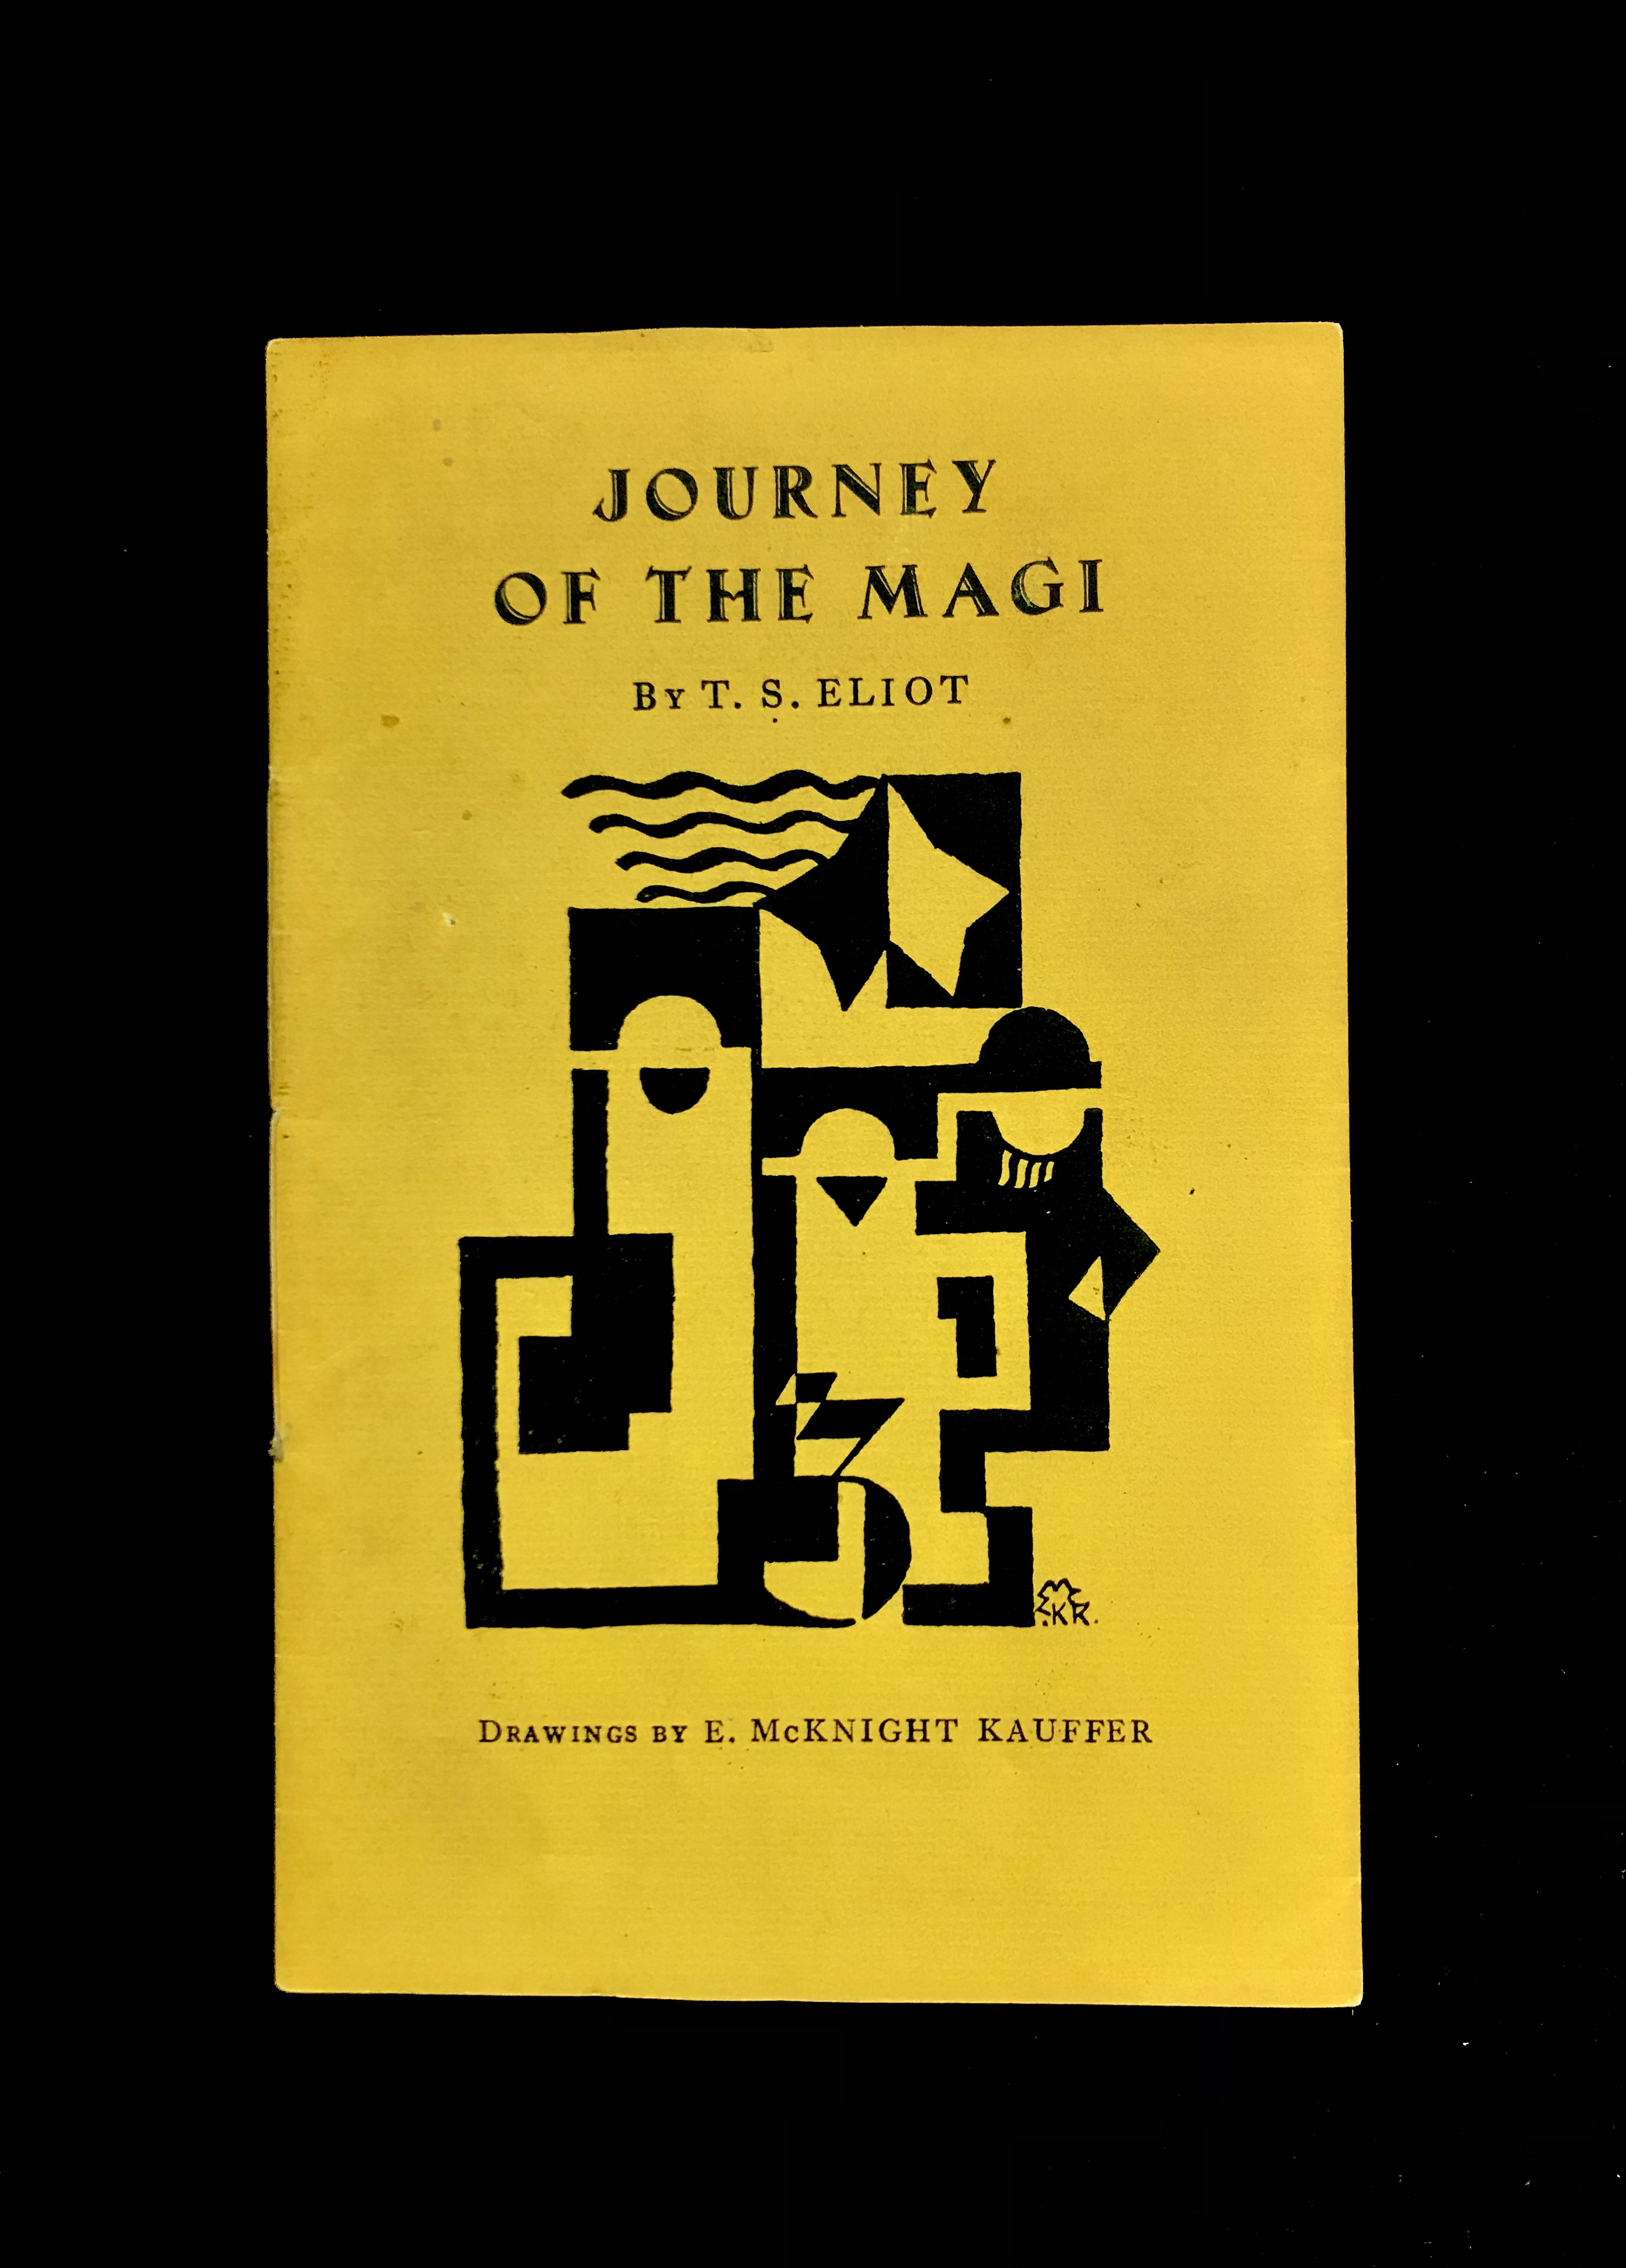 Journey Of The Magi by T. S. Eliot